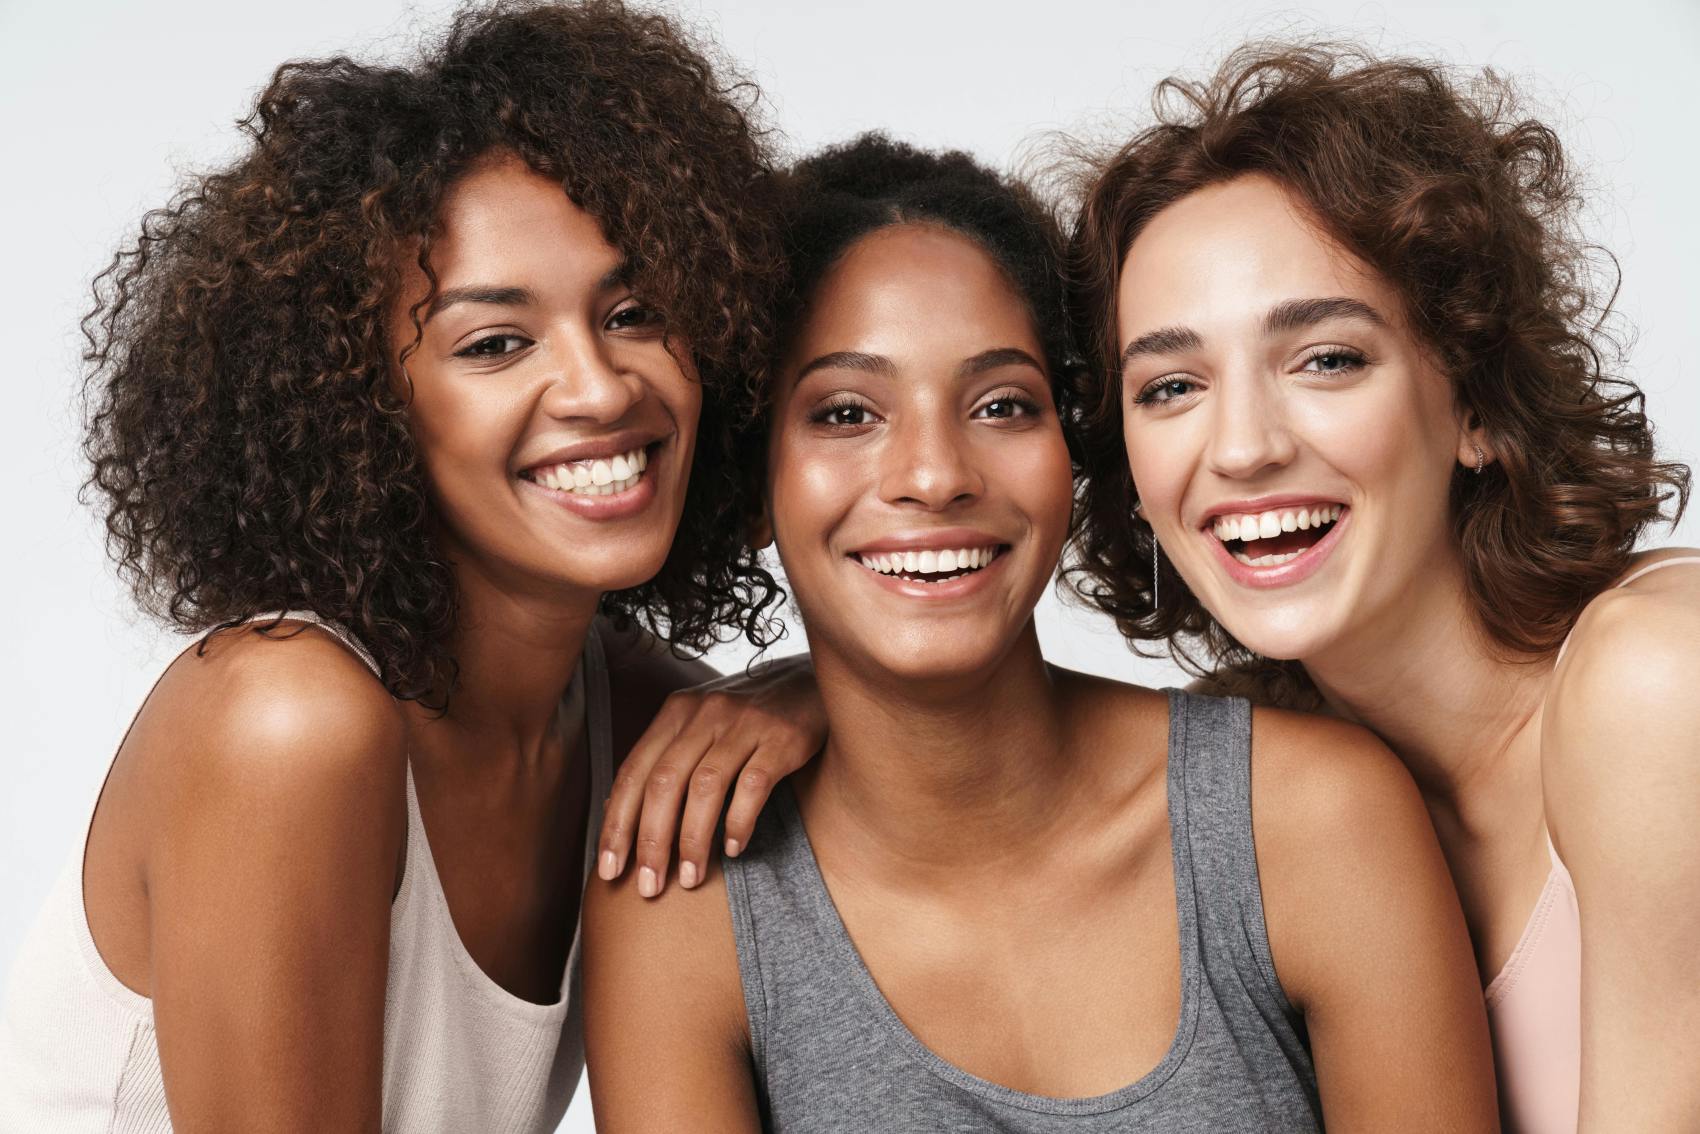 Three women smiling together and hugging